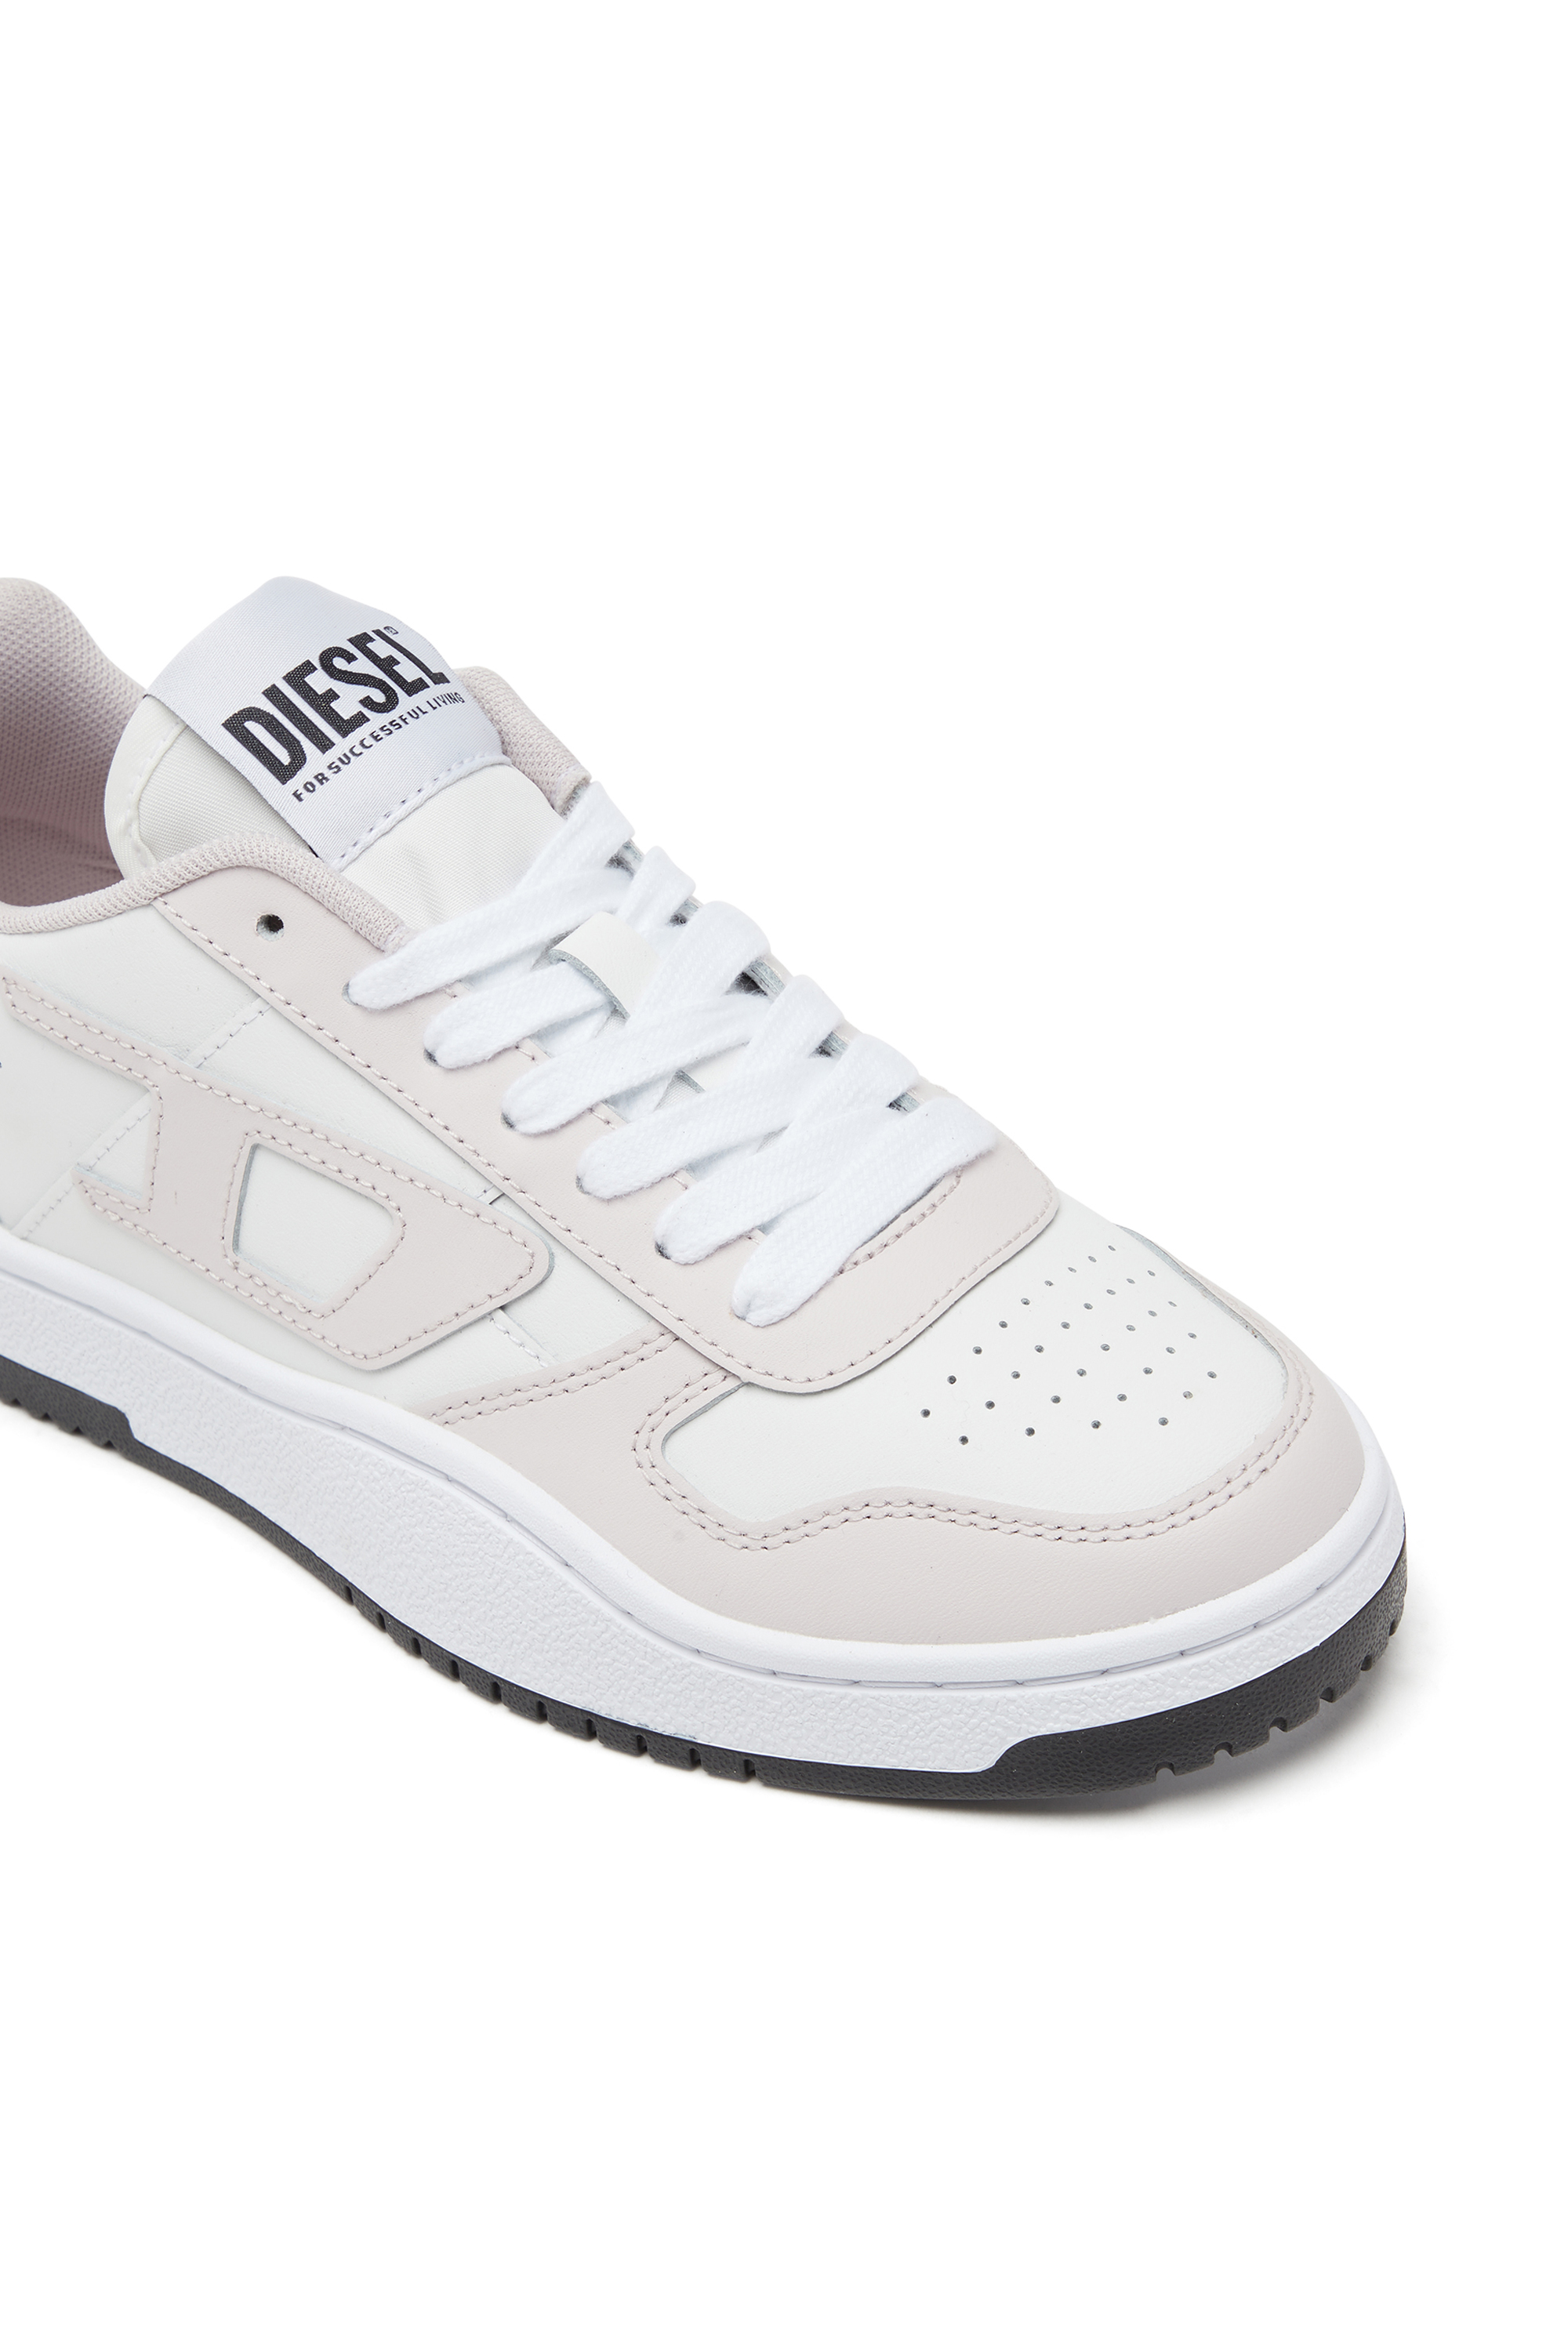 Diesel - S-UKIYO V2 LOW W, Woman S-Ukiyo Low-Low-top sneakers in leather and nylon in Multicolor - Image 6